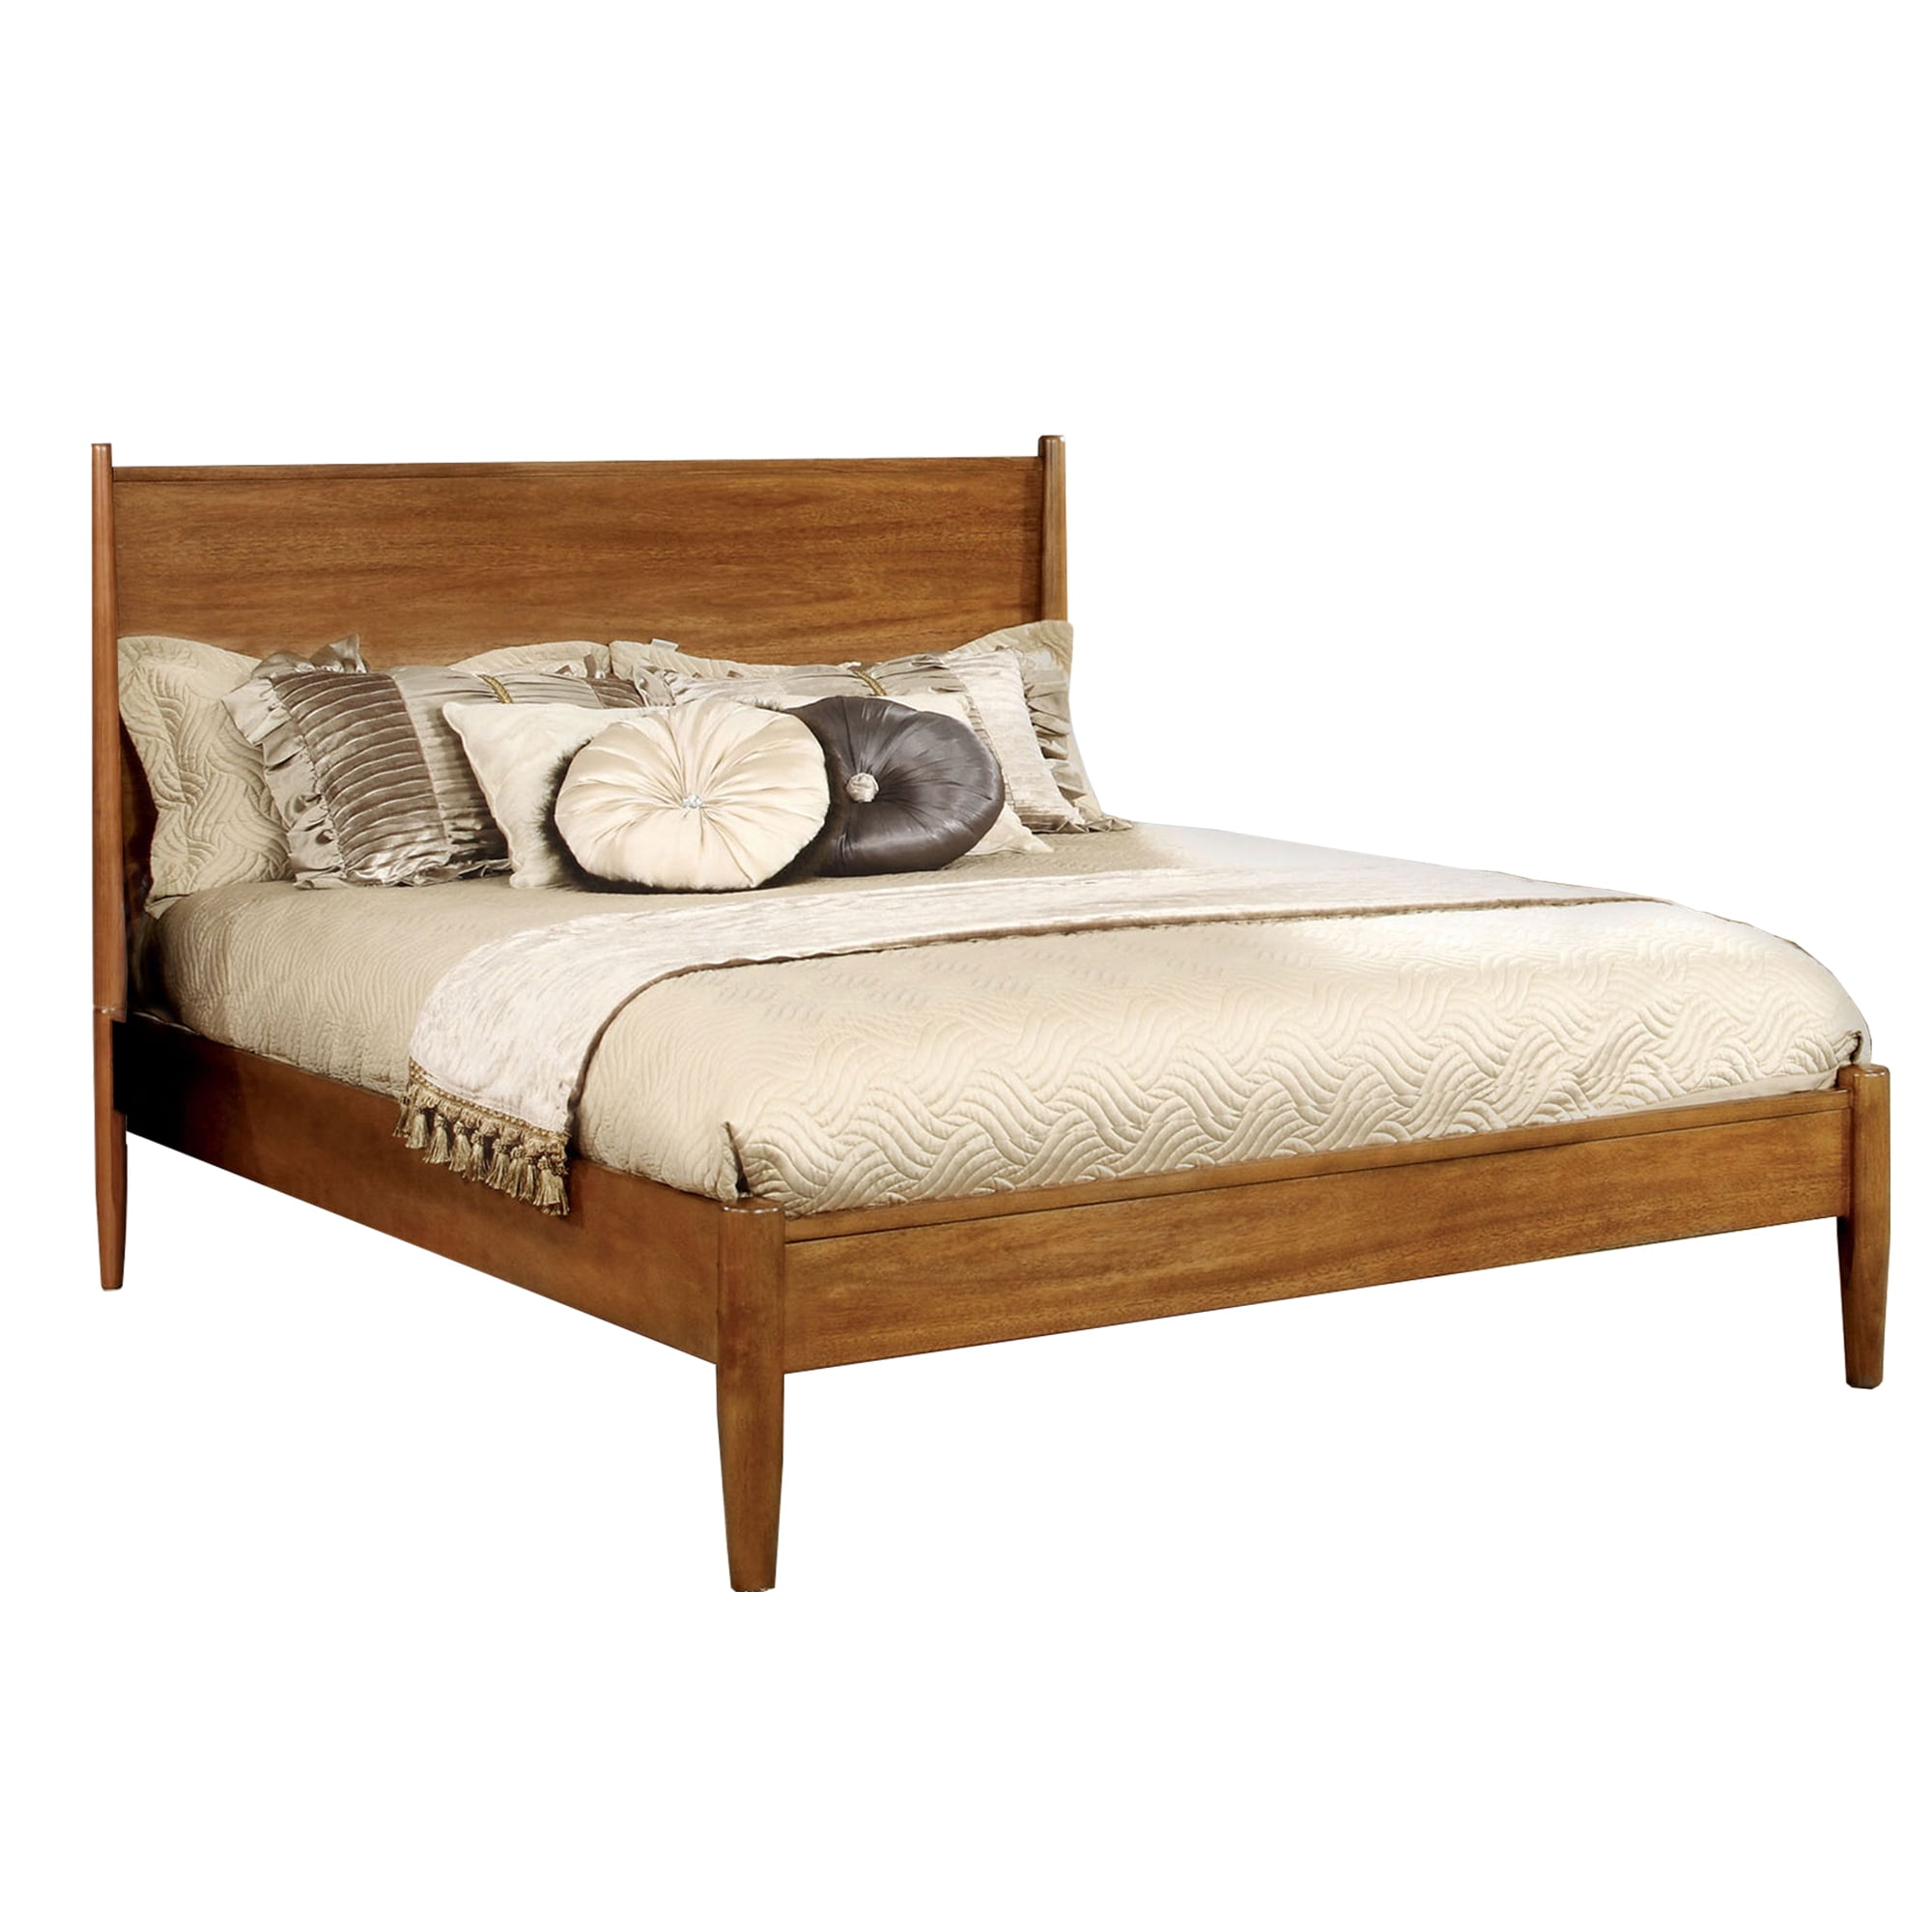 Mid Century Modern Wood Queen Bed with Round Tapered Legs, Rustic Oak